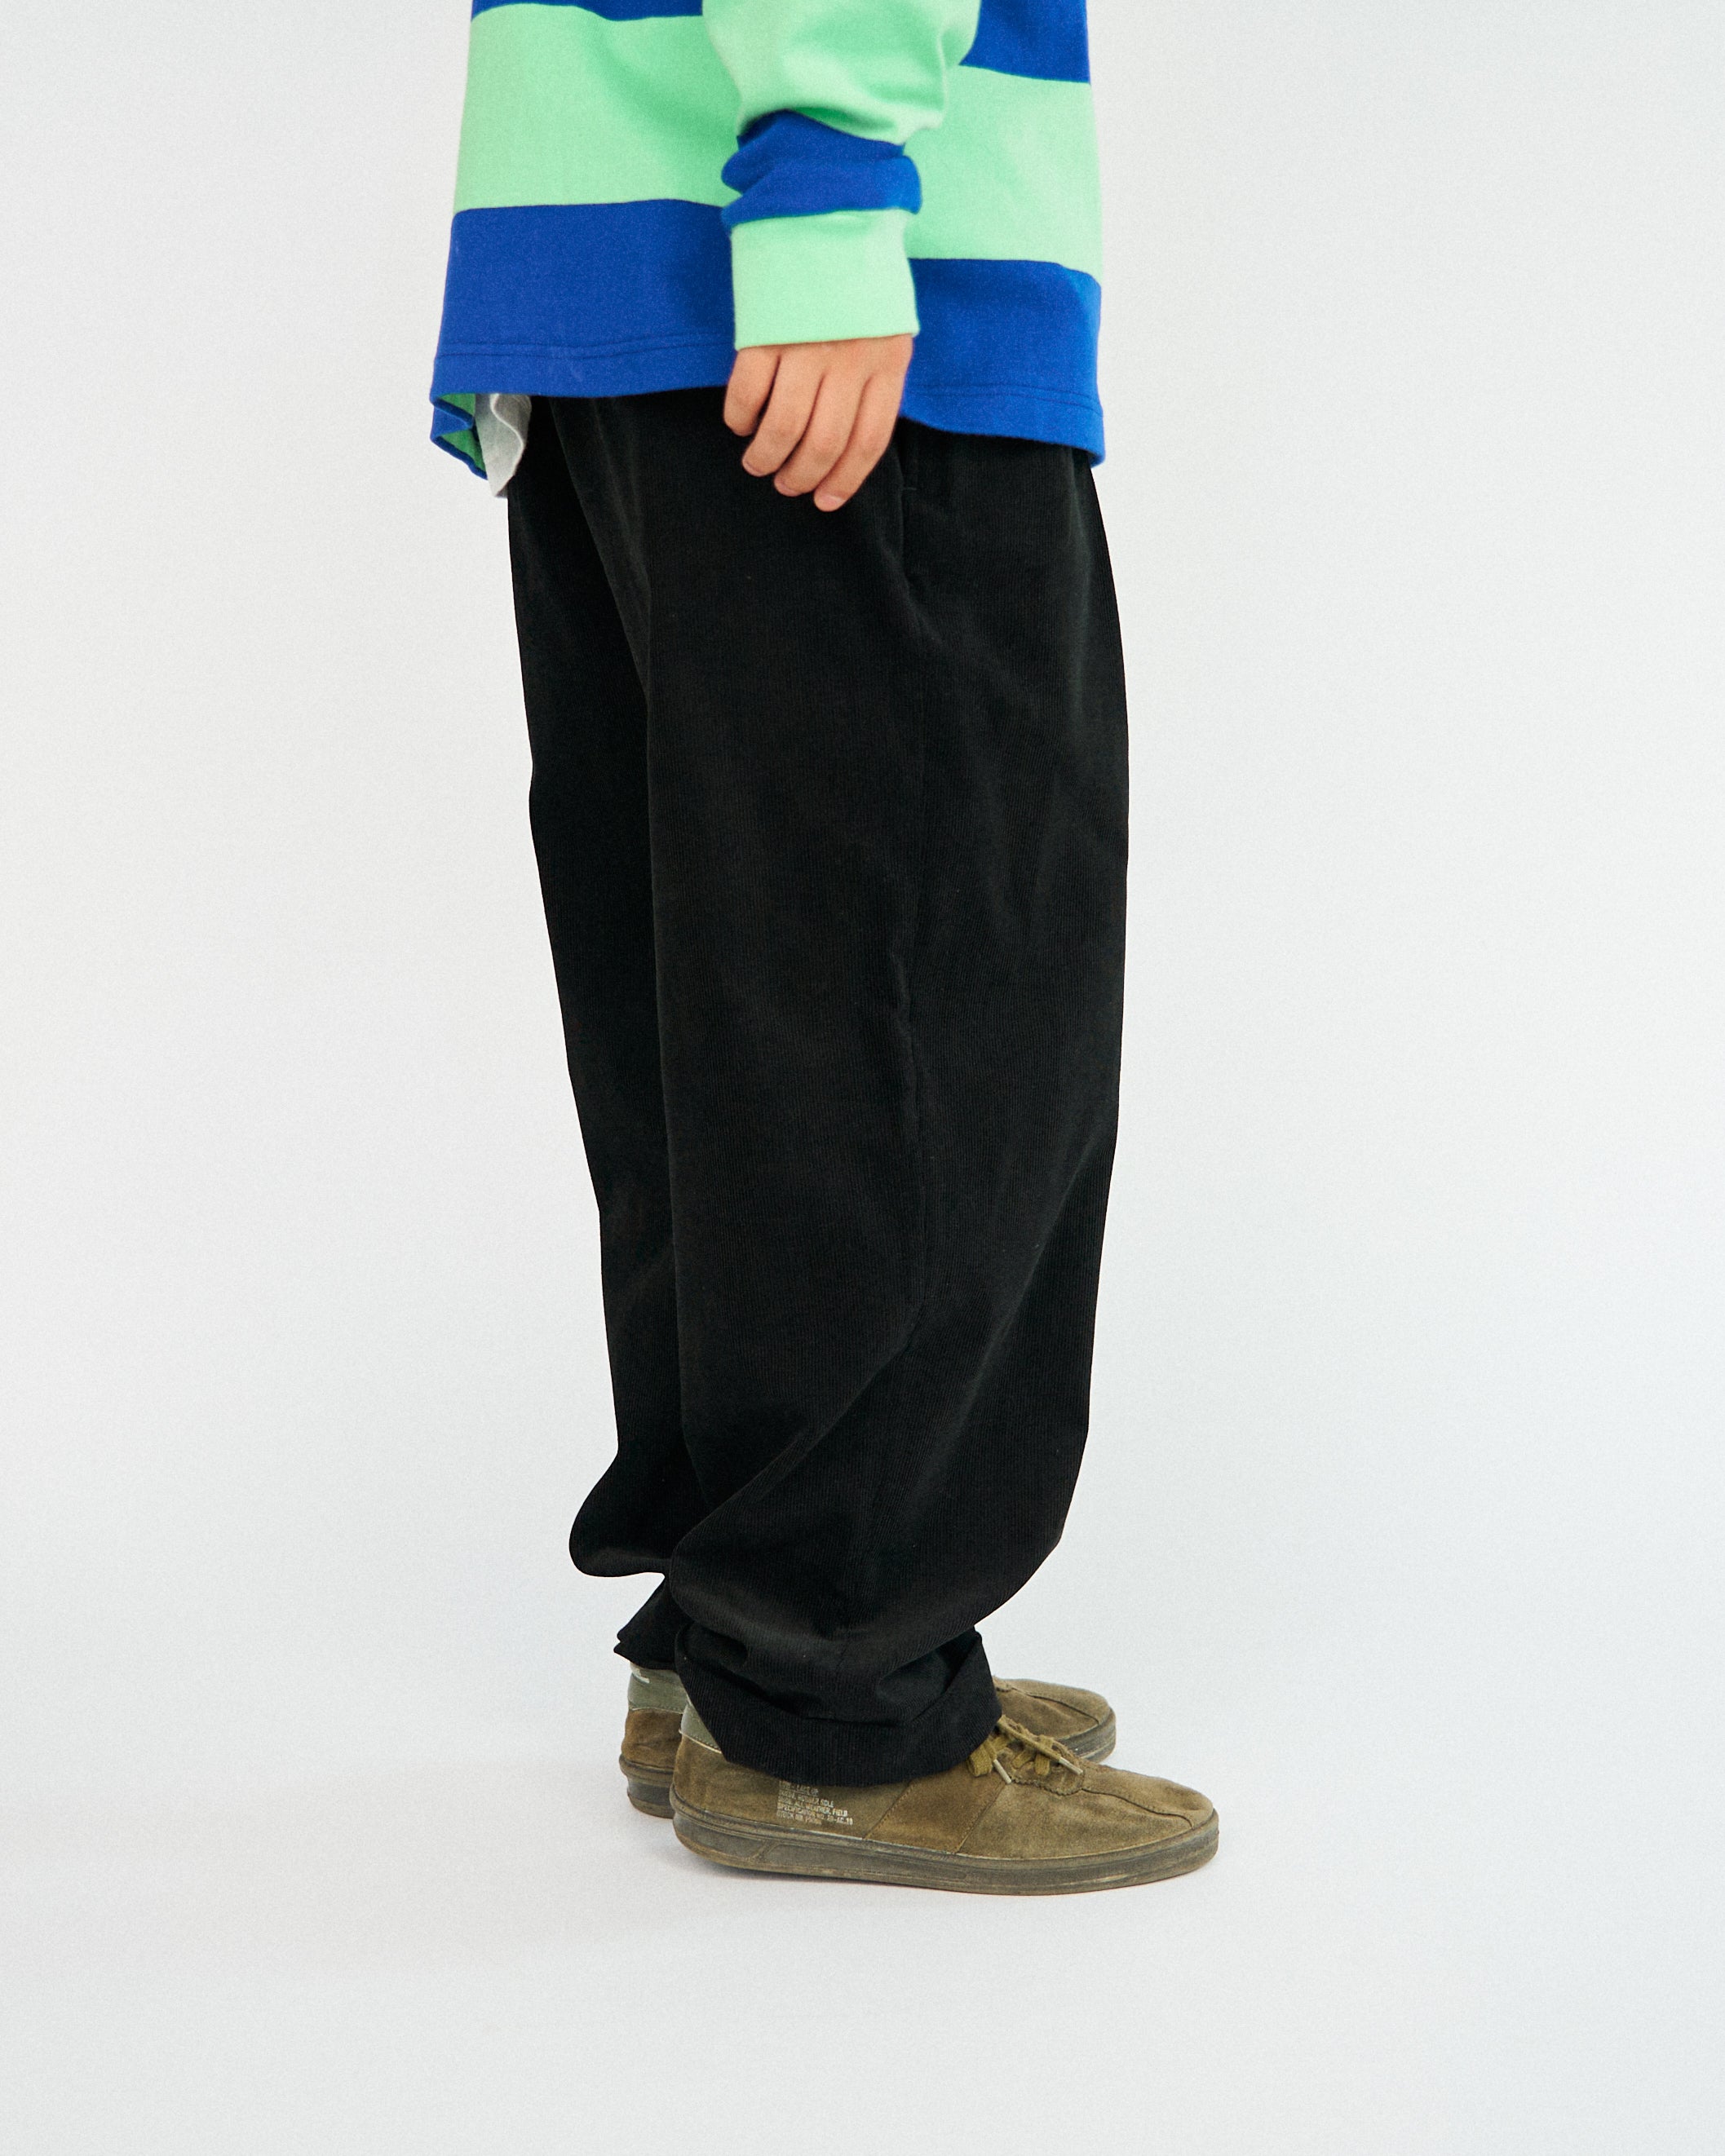 TapWater / Corduroy Tuck Trousers